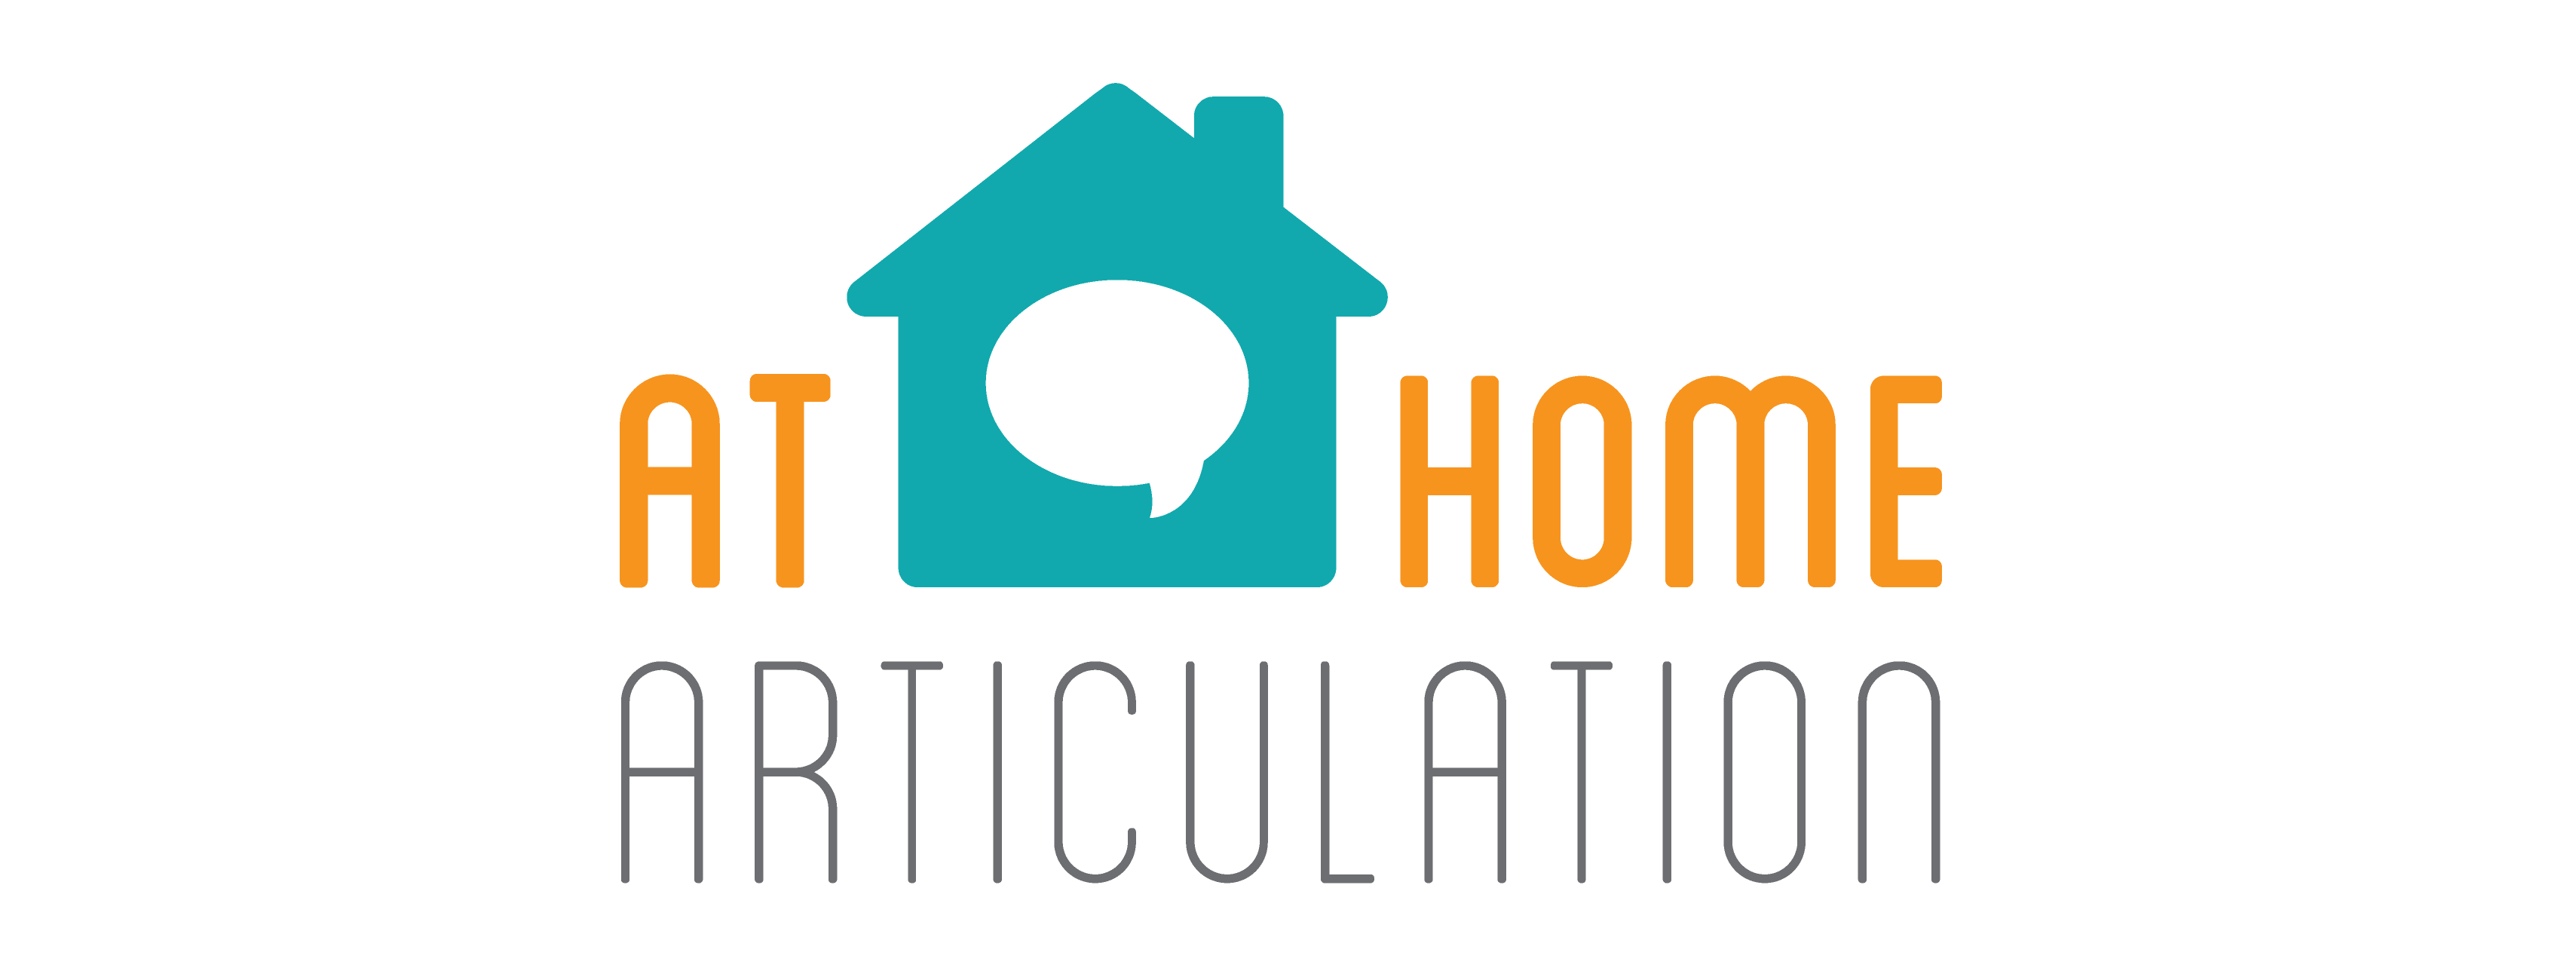 At Home Articulation's Logo